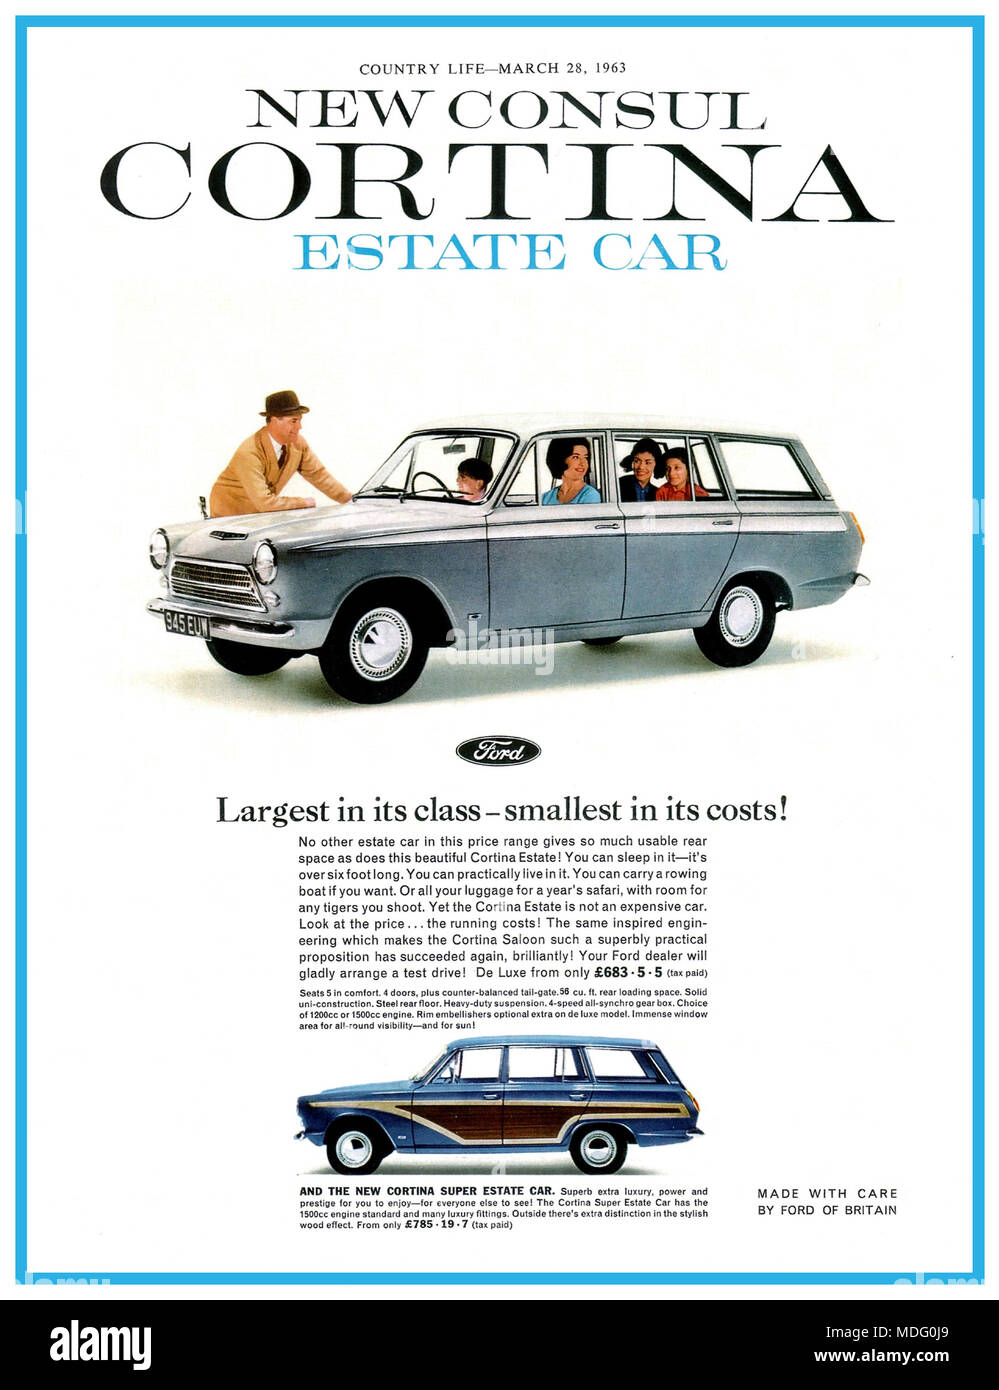 1960's New Consul Ford Cortina Estate Car Press Advertisement Country Life Magazine 1963 The Ford Cortina was a car that was built by Ford of Britain in various guises from 1962 to 1982, and was the United Kingdom's best-selling car of the 1970s. Stock Photo